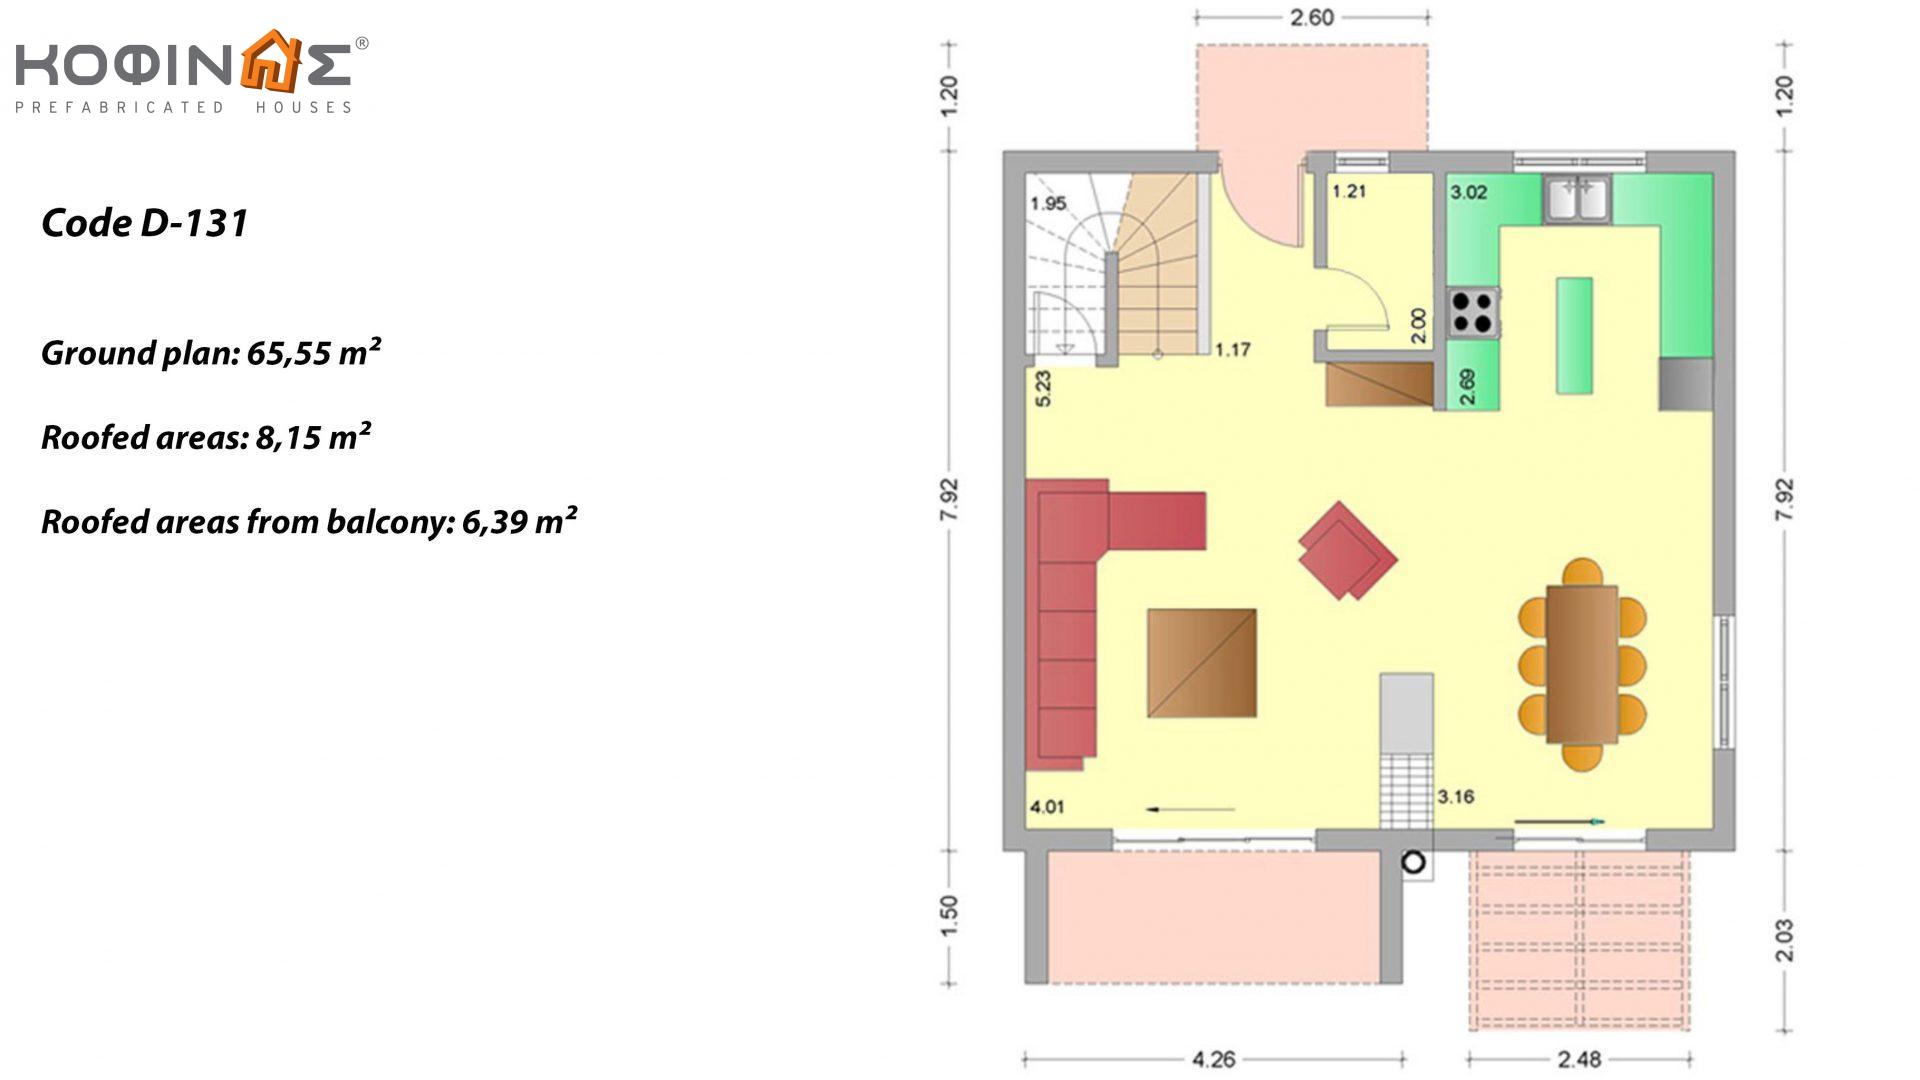 2-story house D-131, total surface of 131,10 m²,covered roofed areas 20.94 m²,balconies 6.40 m²